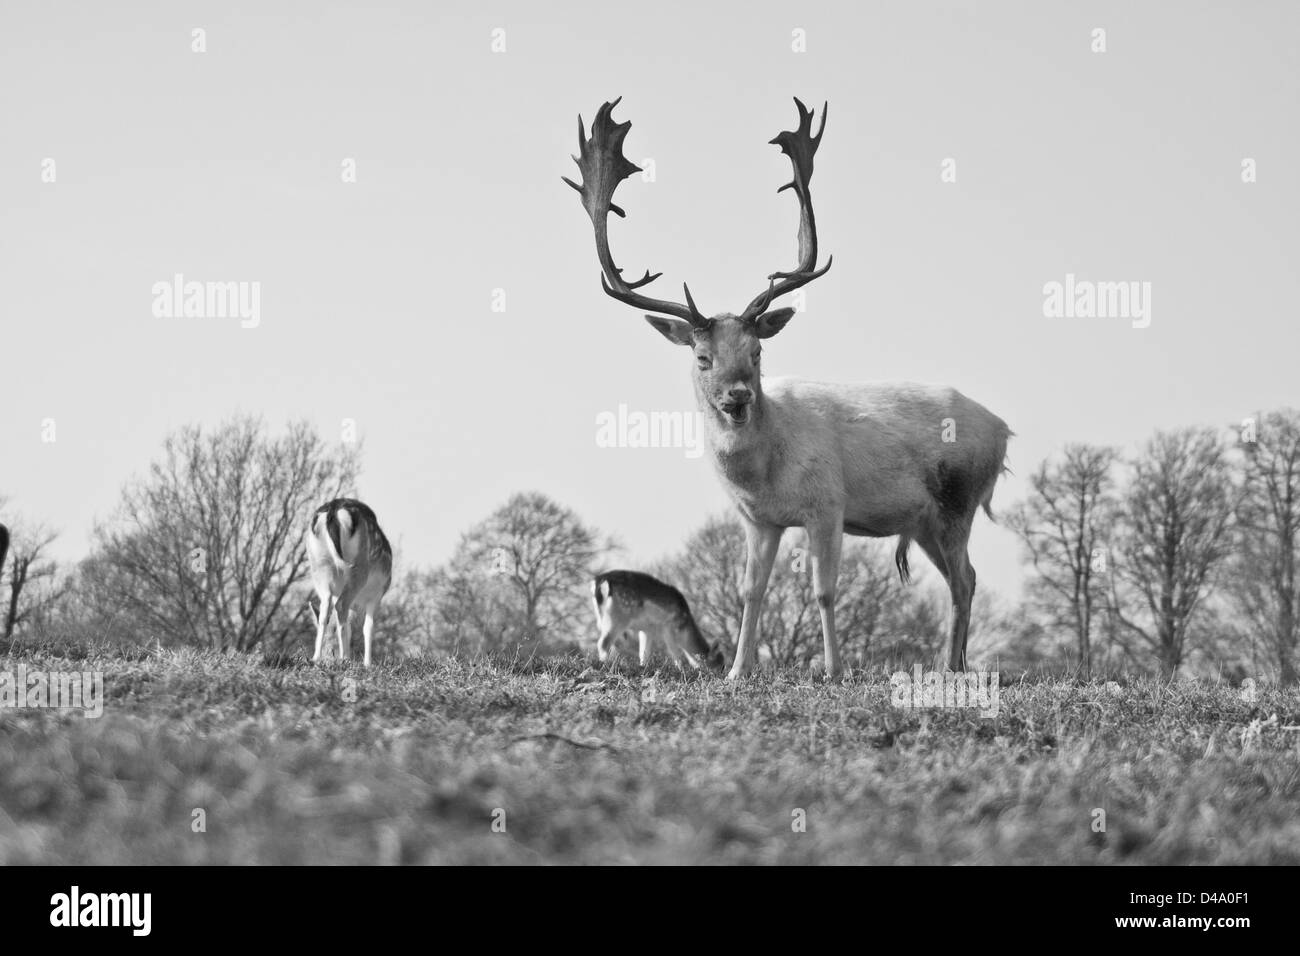 A proud Stag pulling a face at just the right moment. Stock Photo